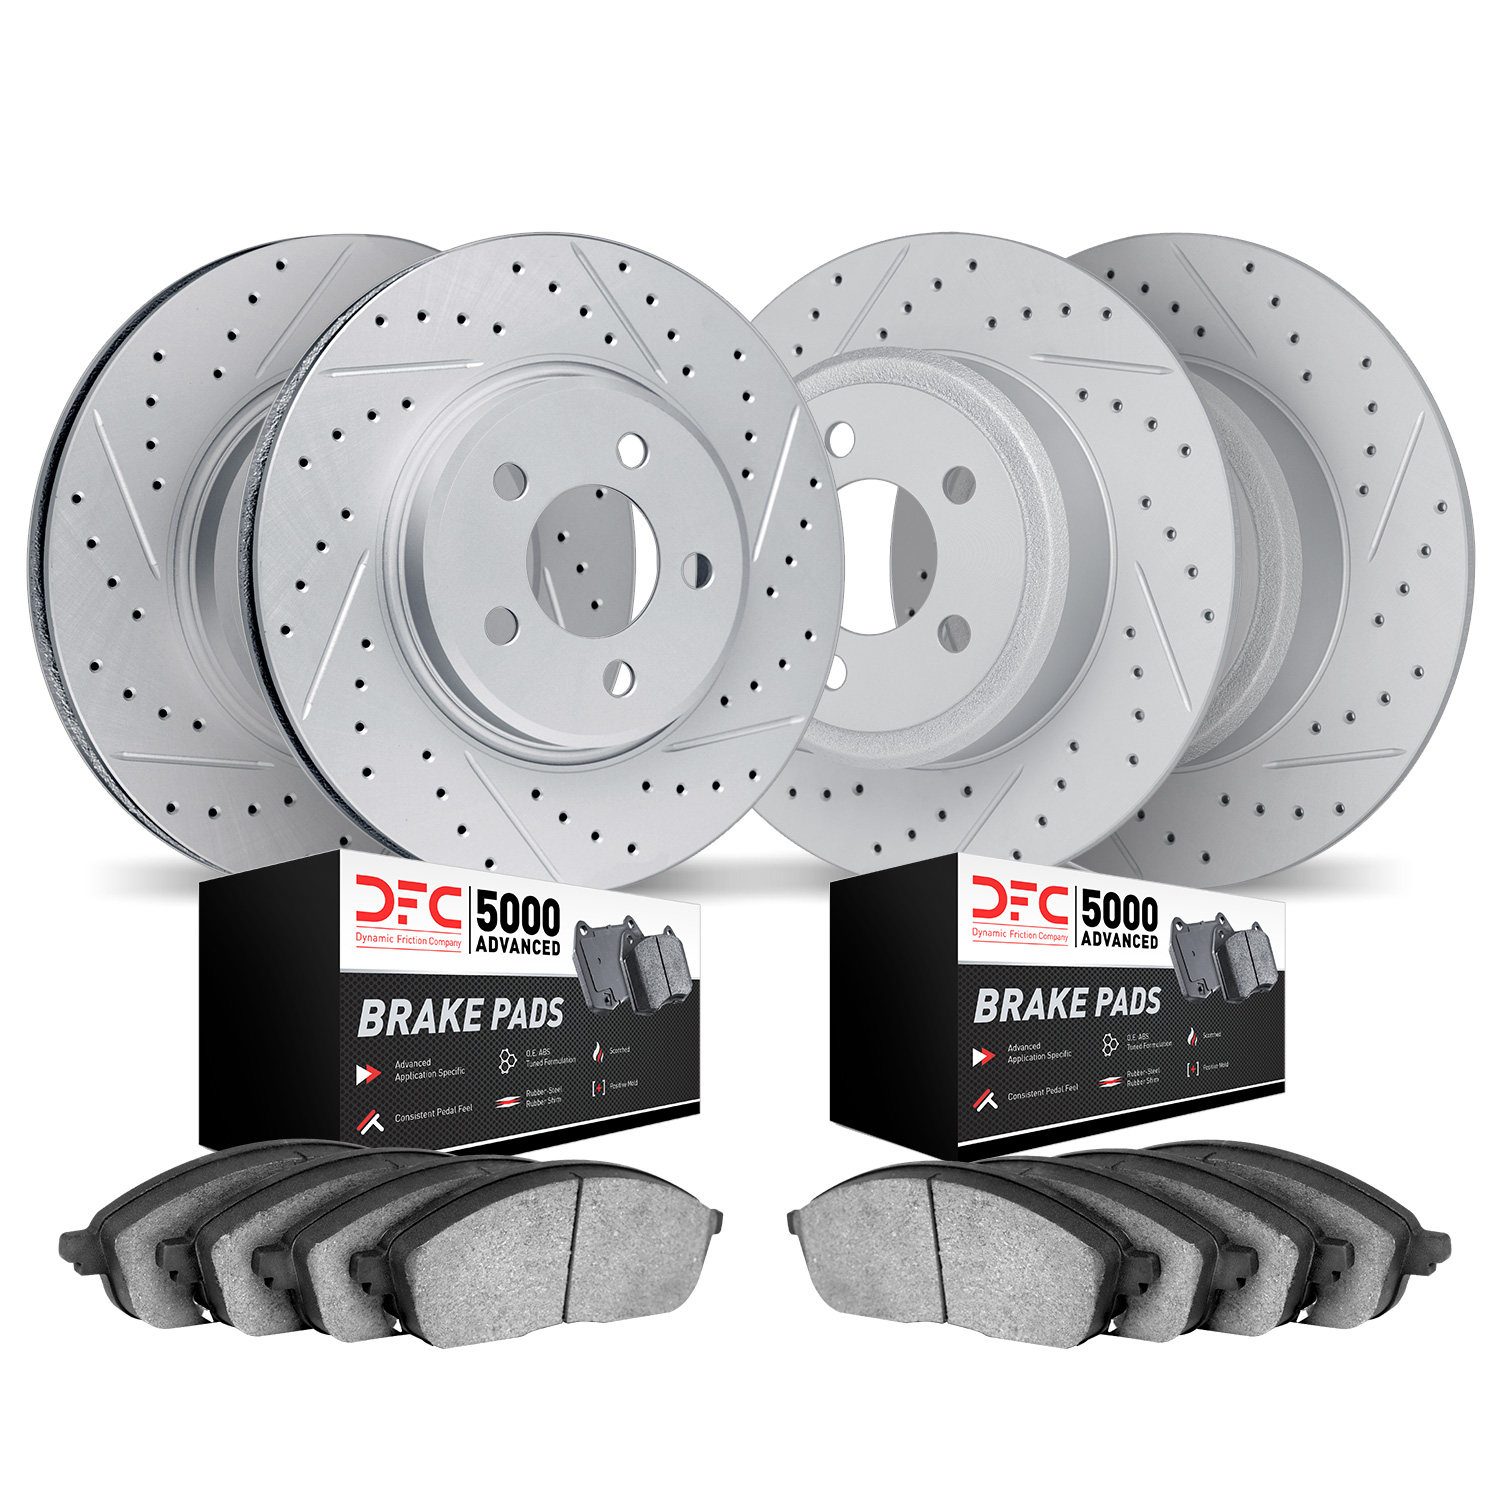 2504-47262 Geoperformance Drilled/Slotted Rotors w/5000 Advanced Brake Pads Kit, 1992-1993 GM, Position: Front and Rear